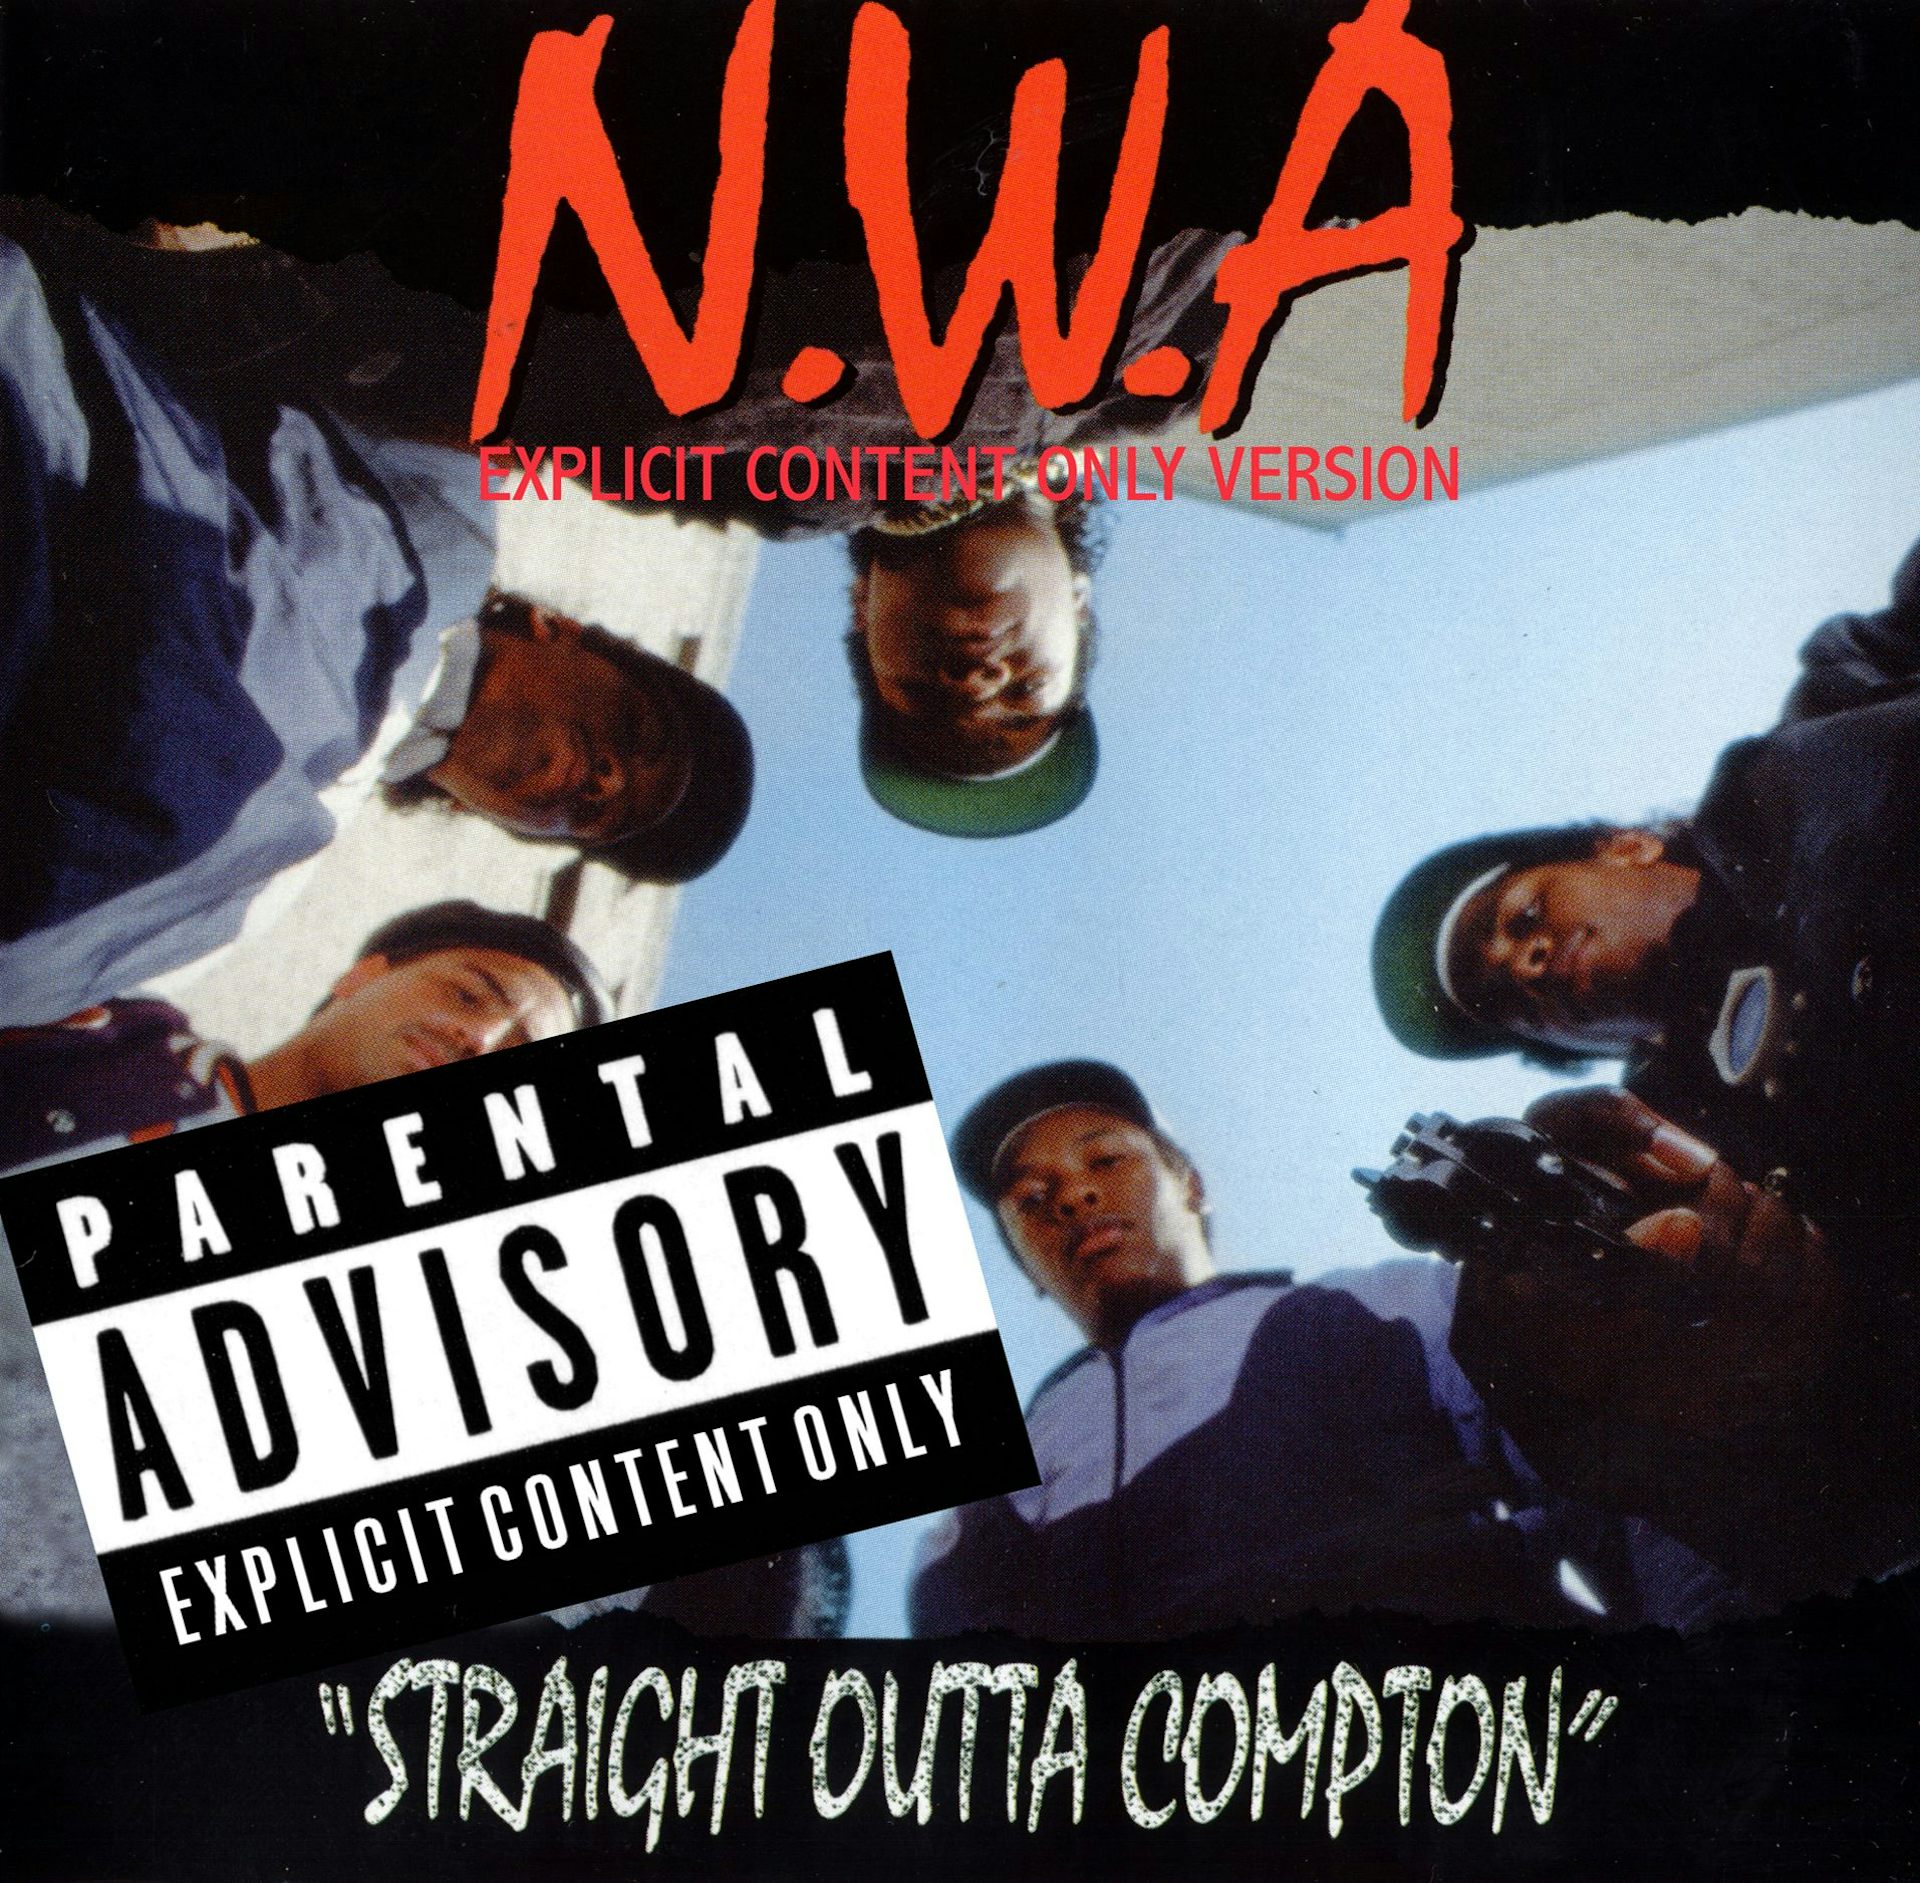 Straight Outta Compton – why now?